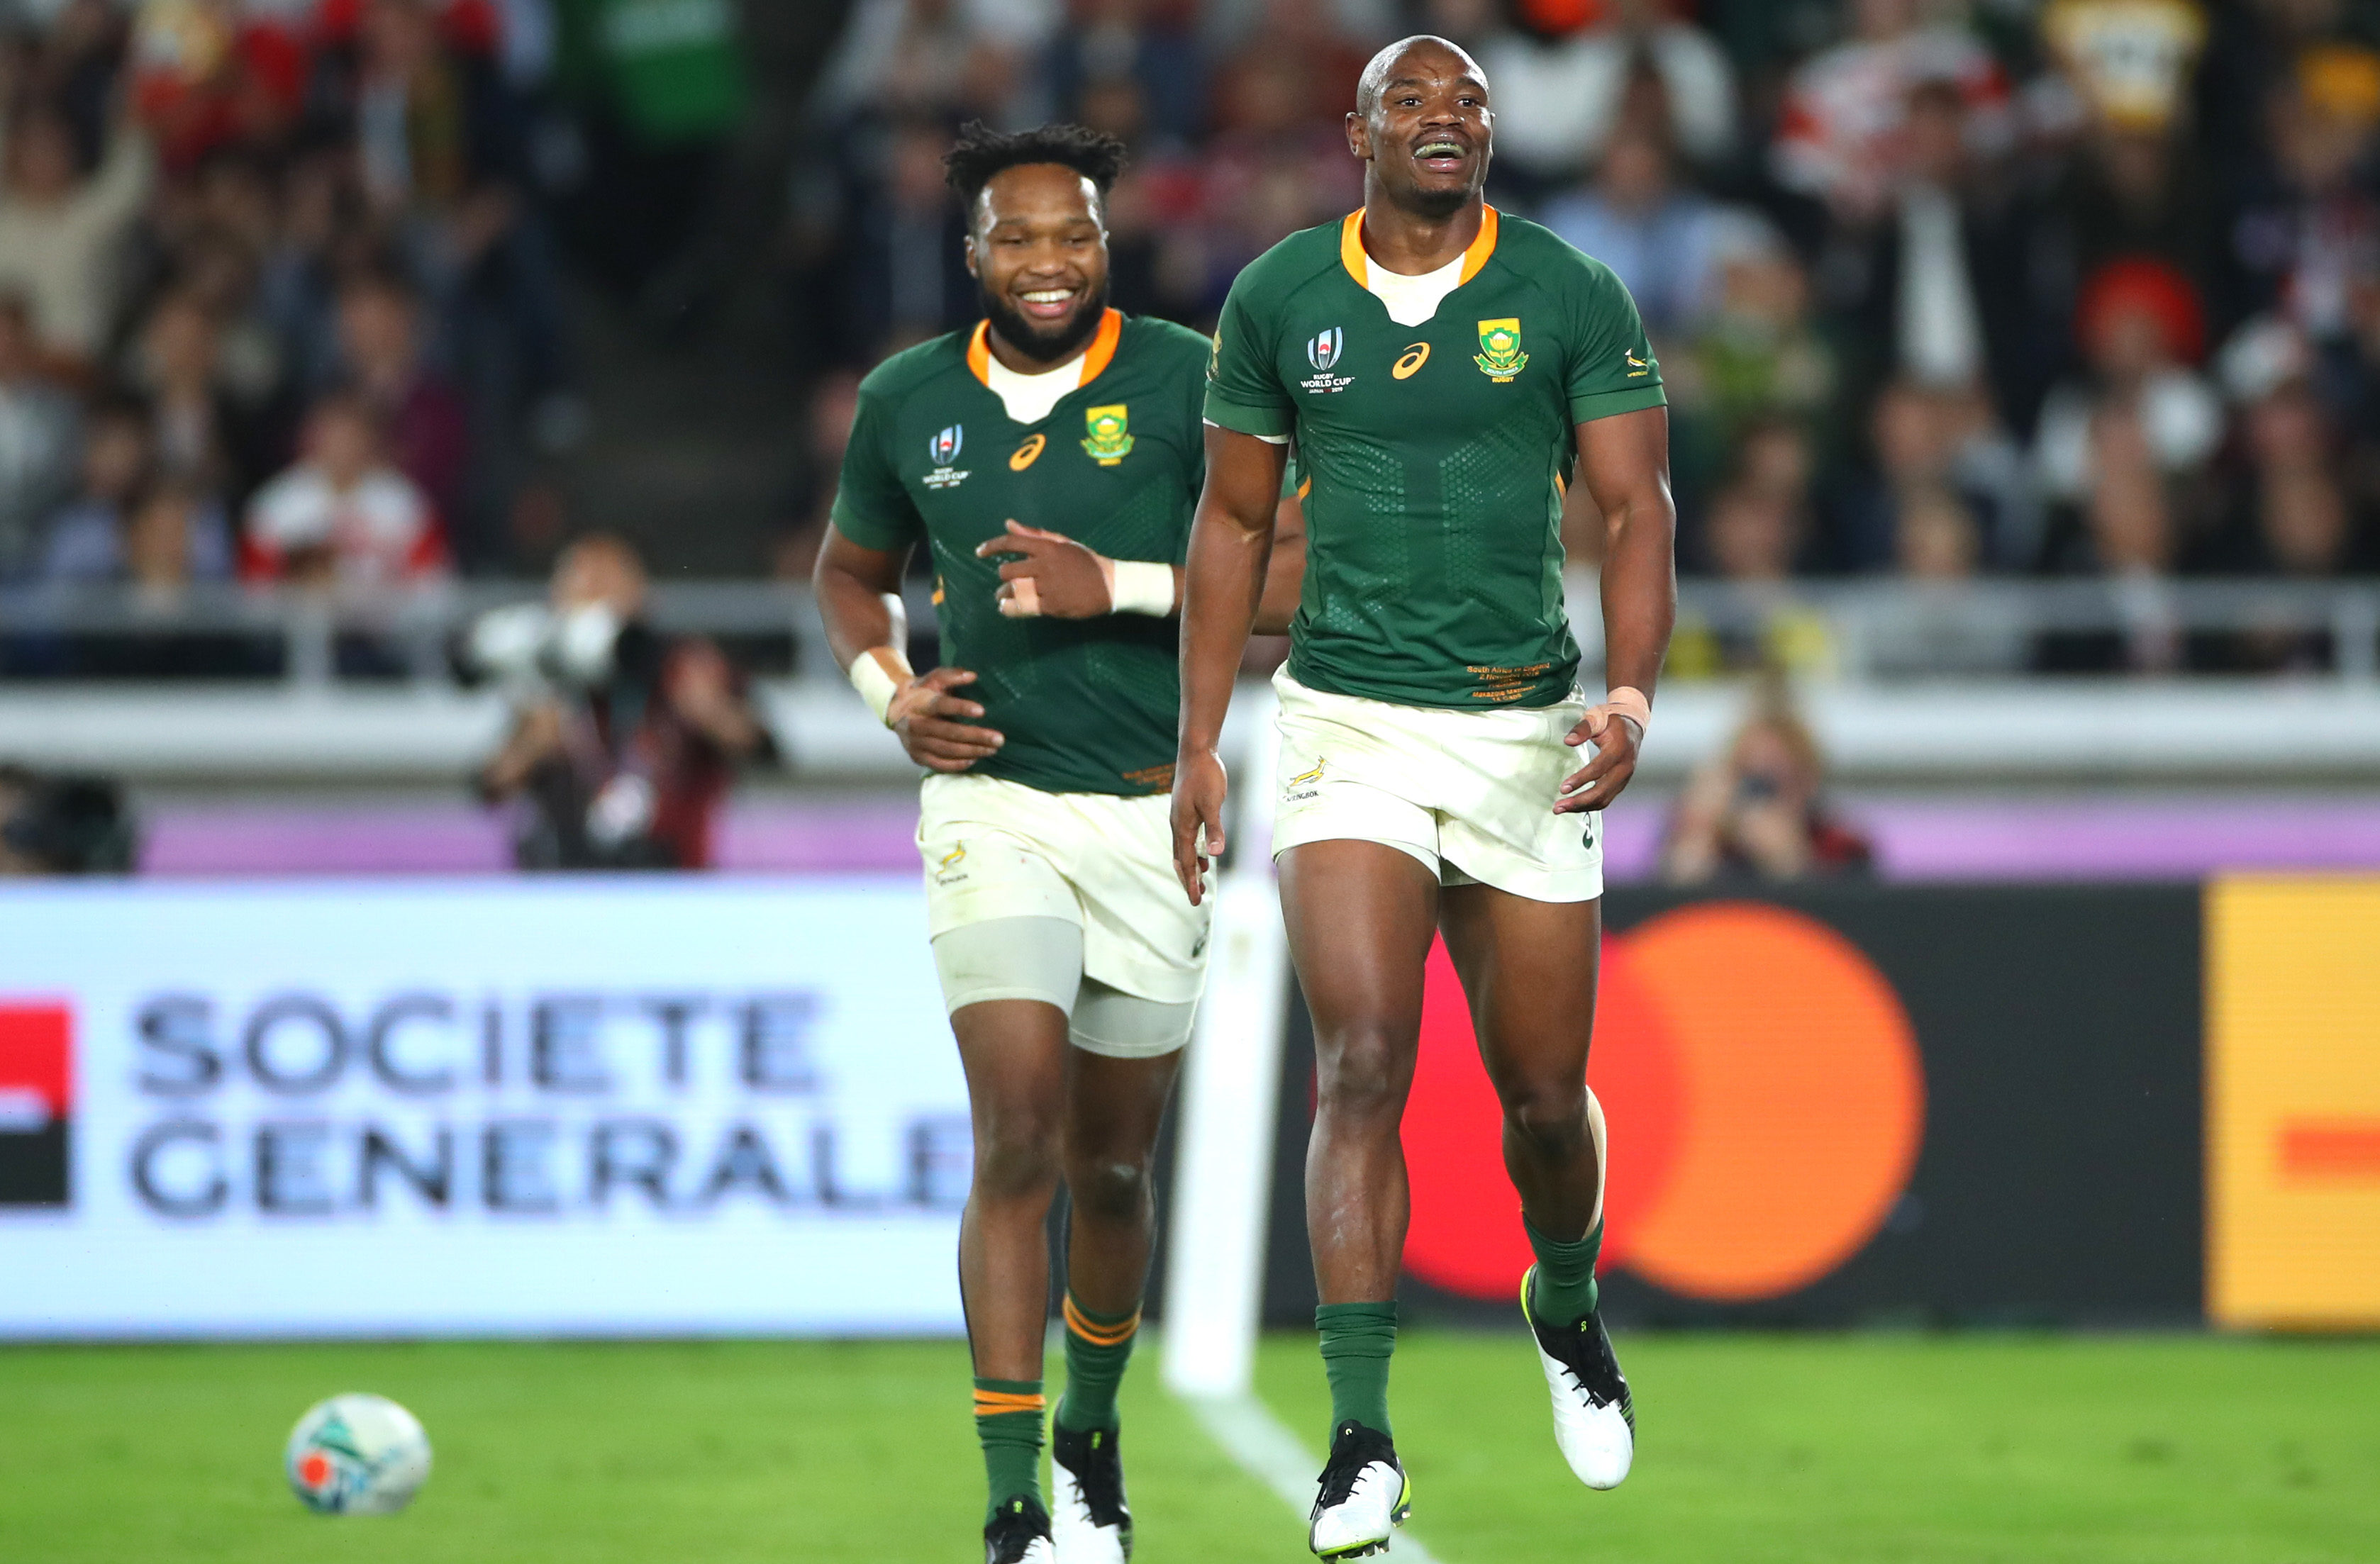 YOKOHAMA, JAPAN - NOVEMBER 02: Makazole Mapimpi of South Africa celebrates with team mate Lukhanyo Am after scoring their team's first try during the Rugby World Cup 2019 Final between England and South Africa at International Stadium Yokohama on November 02, 2019 in Yokohama, Kanagawa, Japan. (Photo by Cameron Spencer/Getty Images)